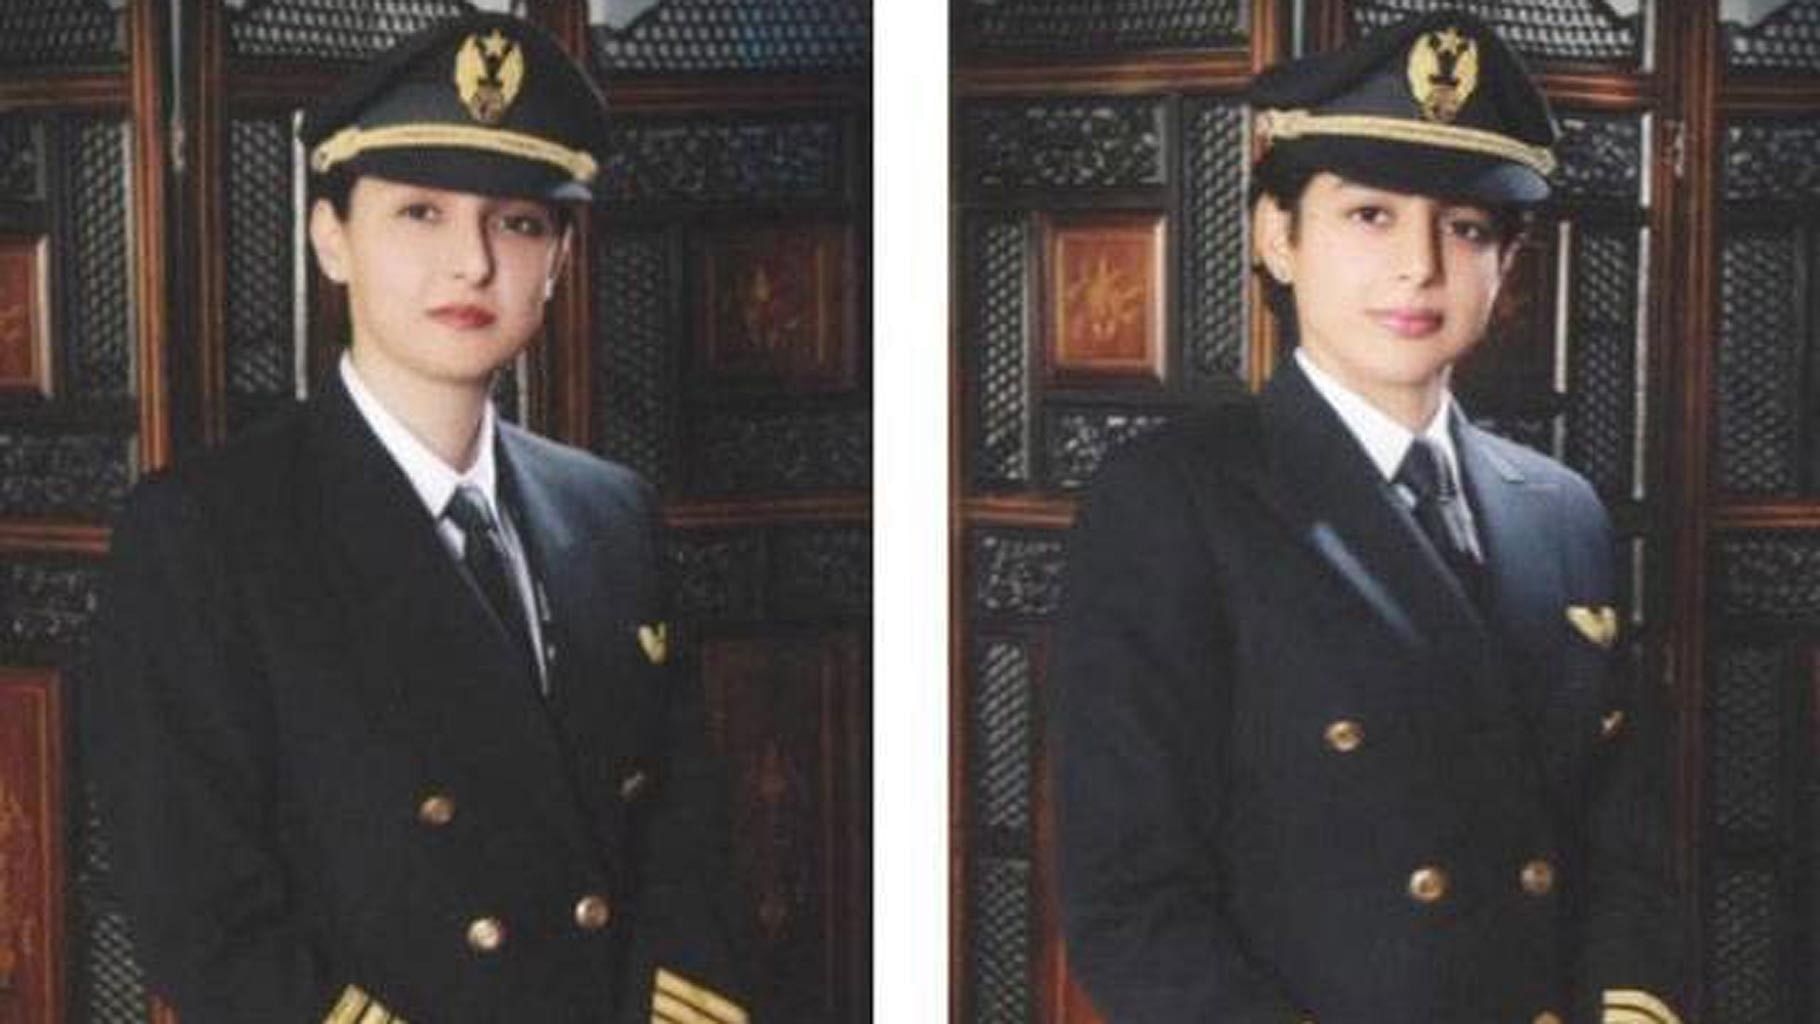 Maryam Masood and Erum Masood have been flying different planes but finally ended up in the same plane. (Photo: Twitter/<a href="https://twitter.com/Danyal_Gilani">@Danyal_Gilani</a>)